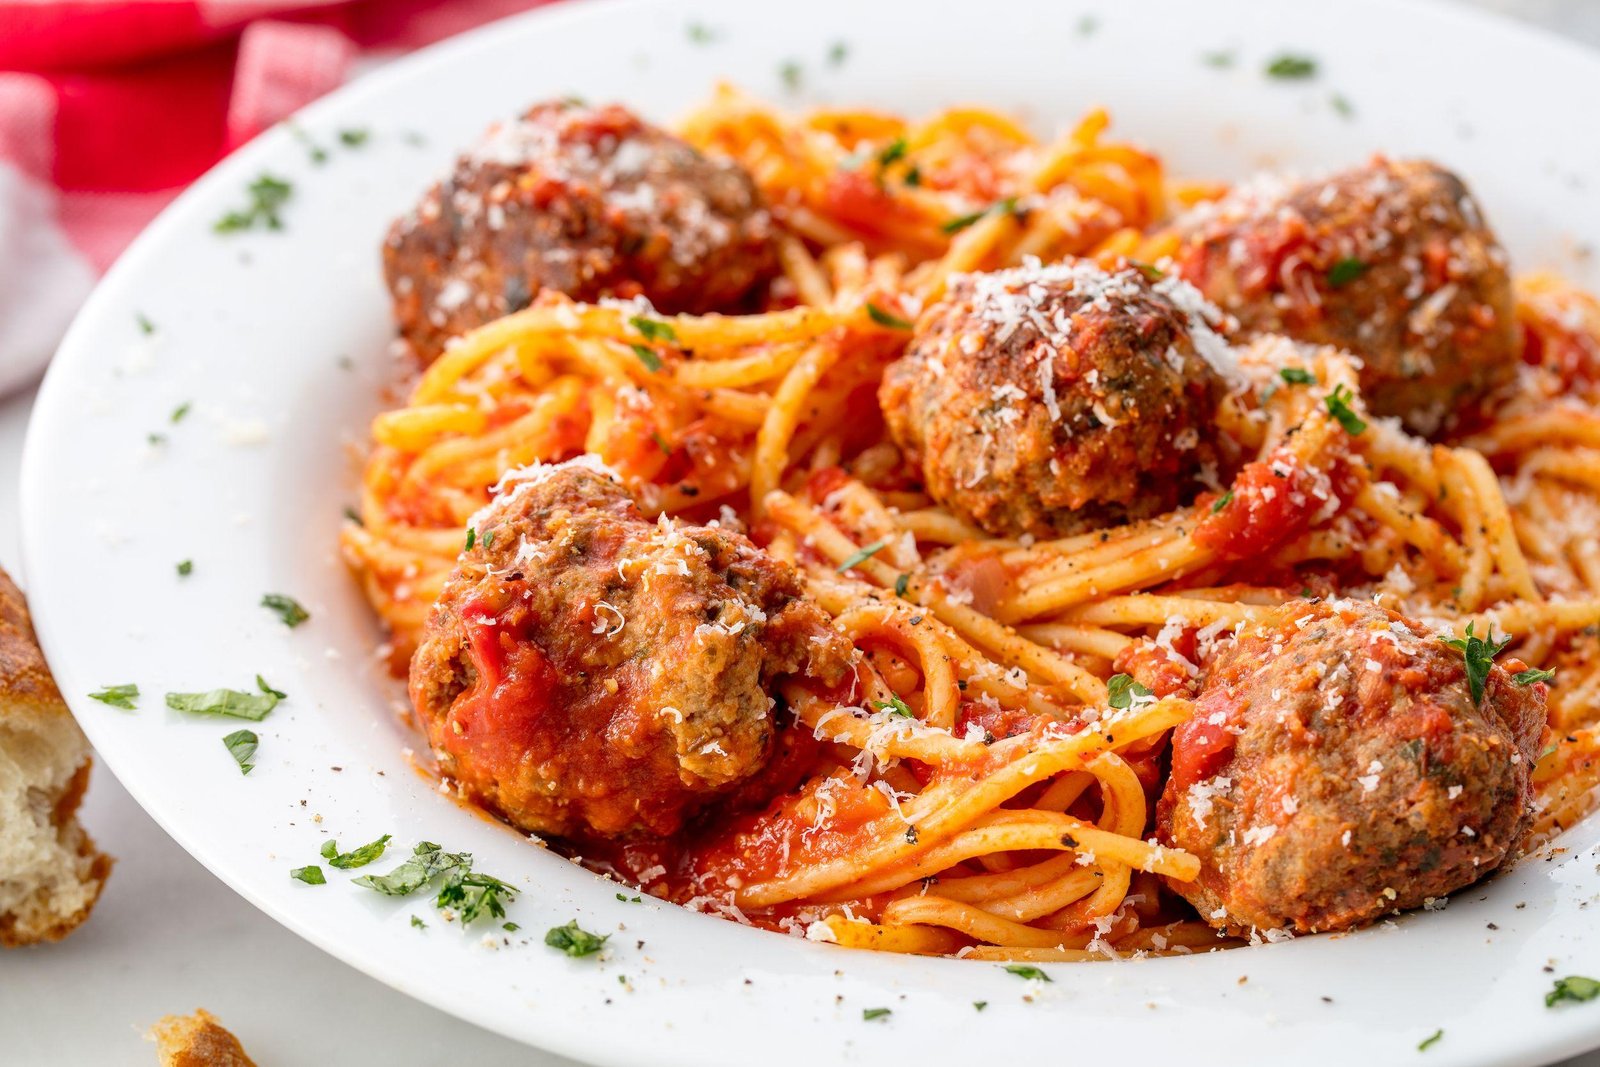 From Scratch: Homemade Spaghetti and Meatballs Recipe